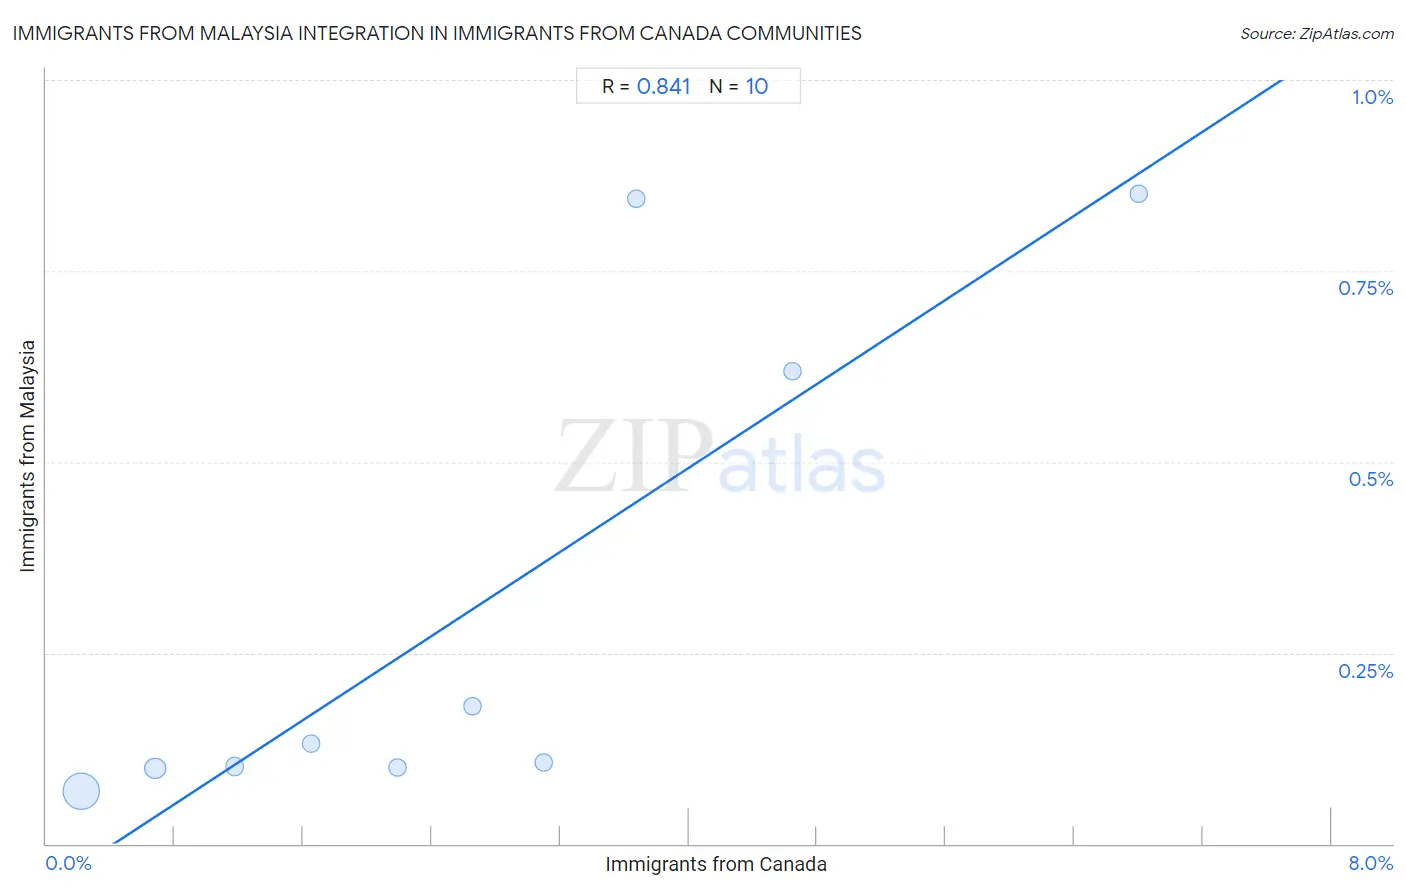 Immigrants from Canada Integration in Immigrants from Malaysia Communities